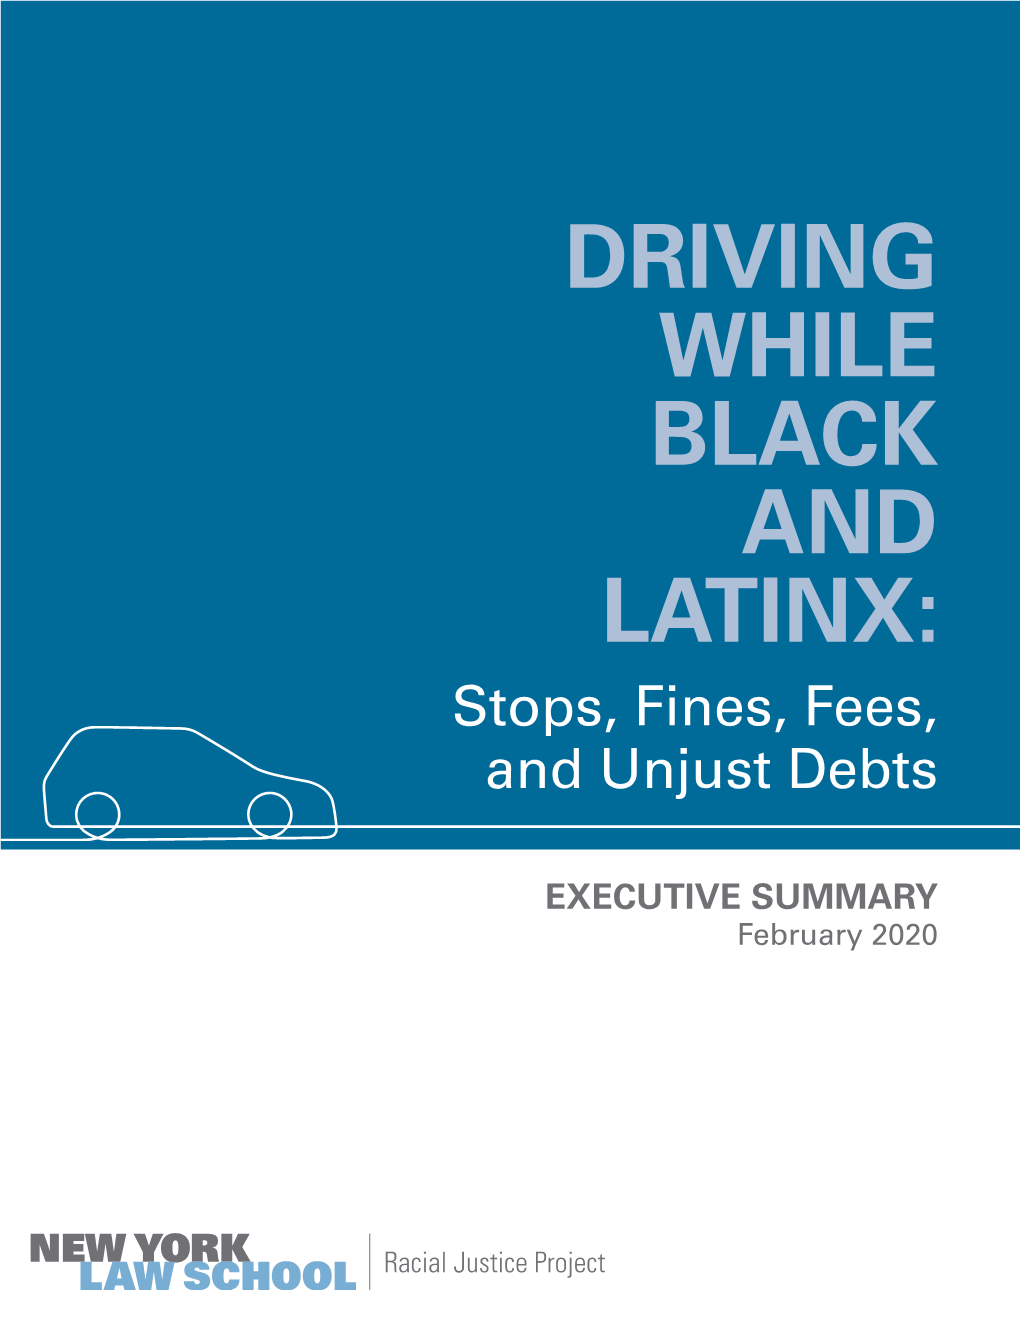 DRIVING WHILE BLACK and LATINX: Stops, Fines, Fees, and Unjust Debts